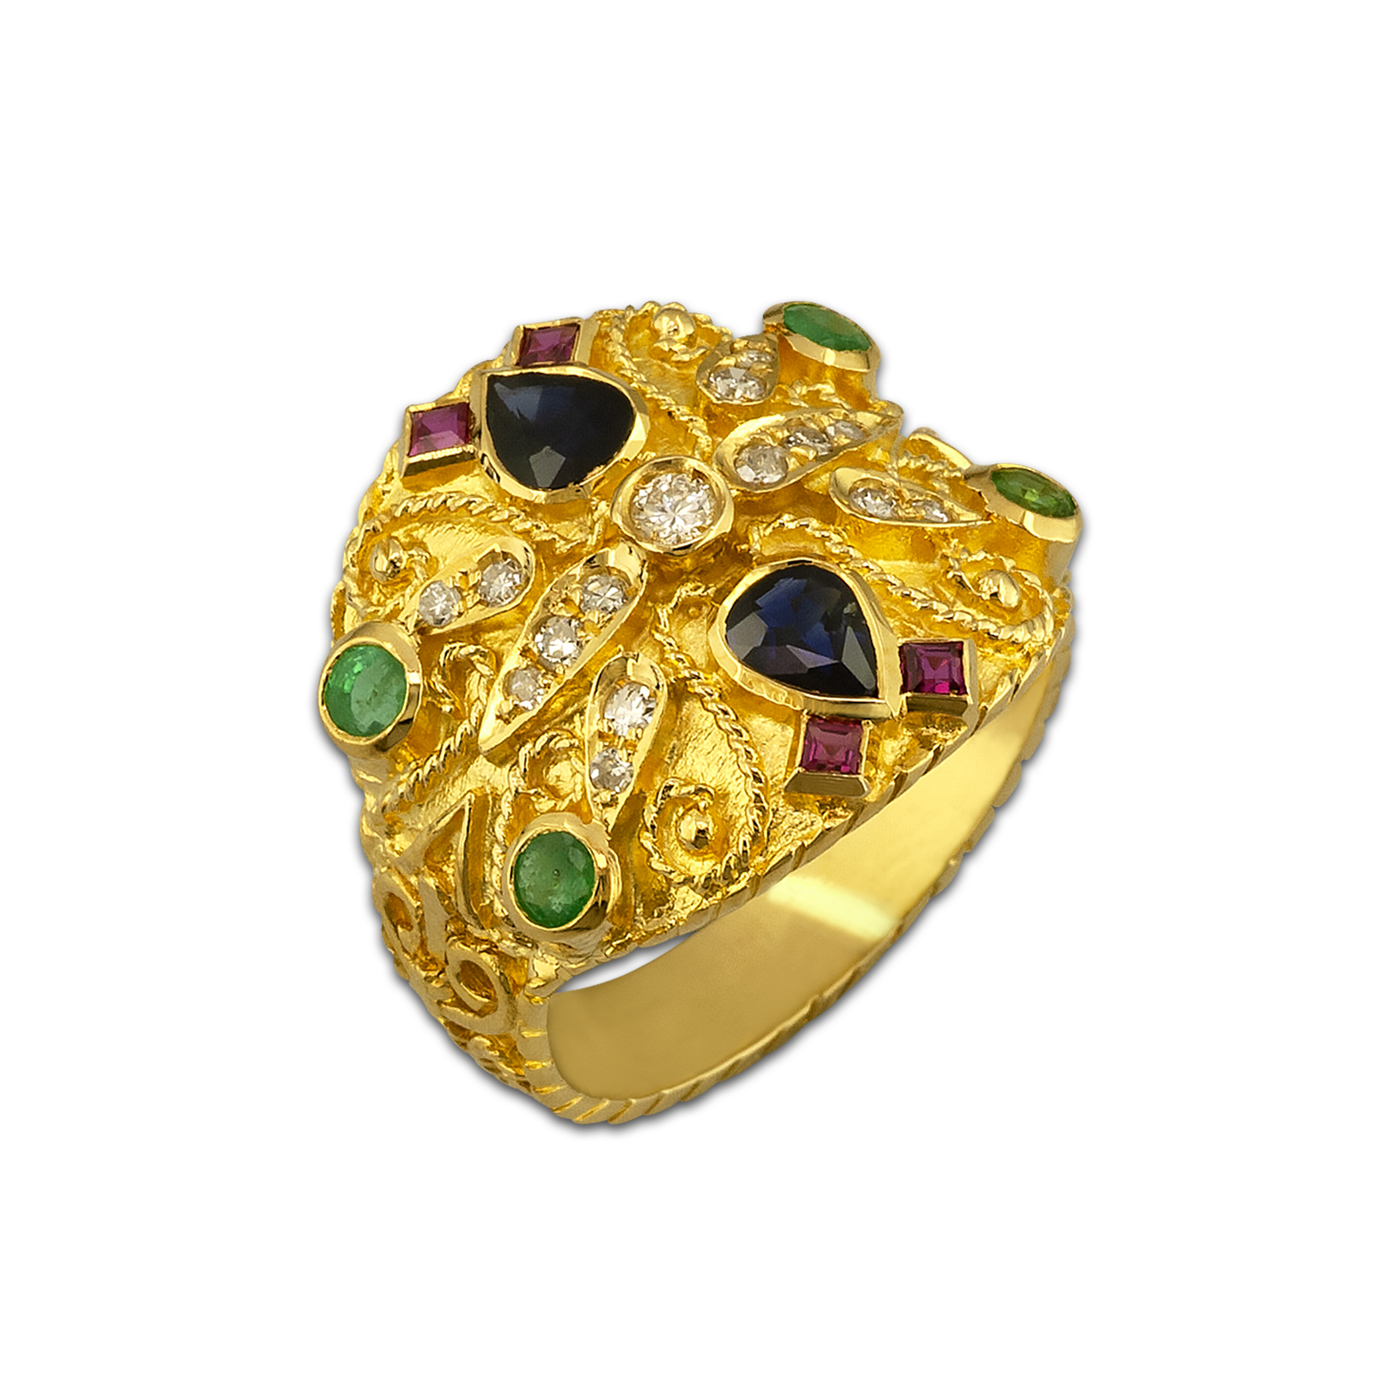 Imperial gold ring with precious stones